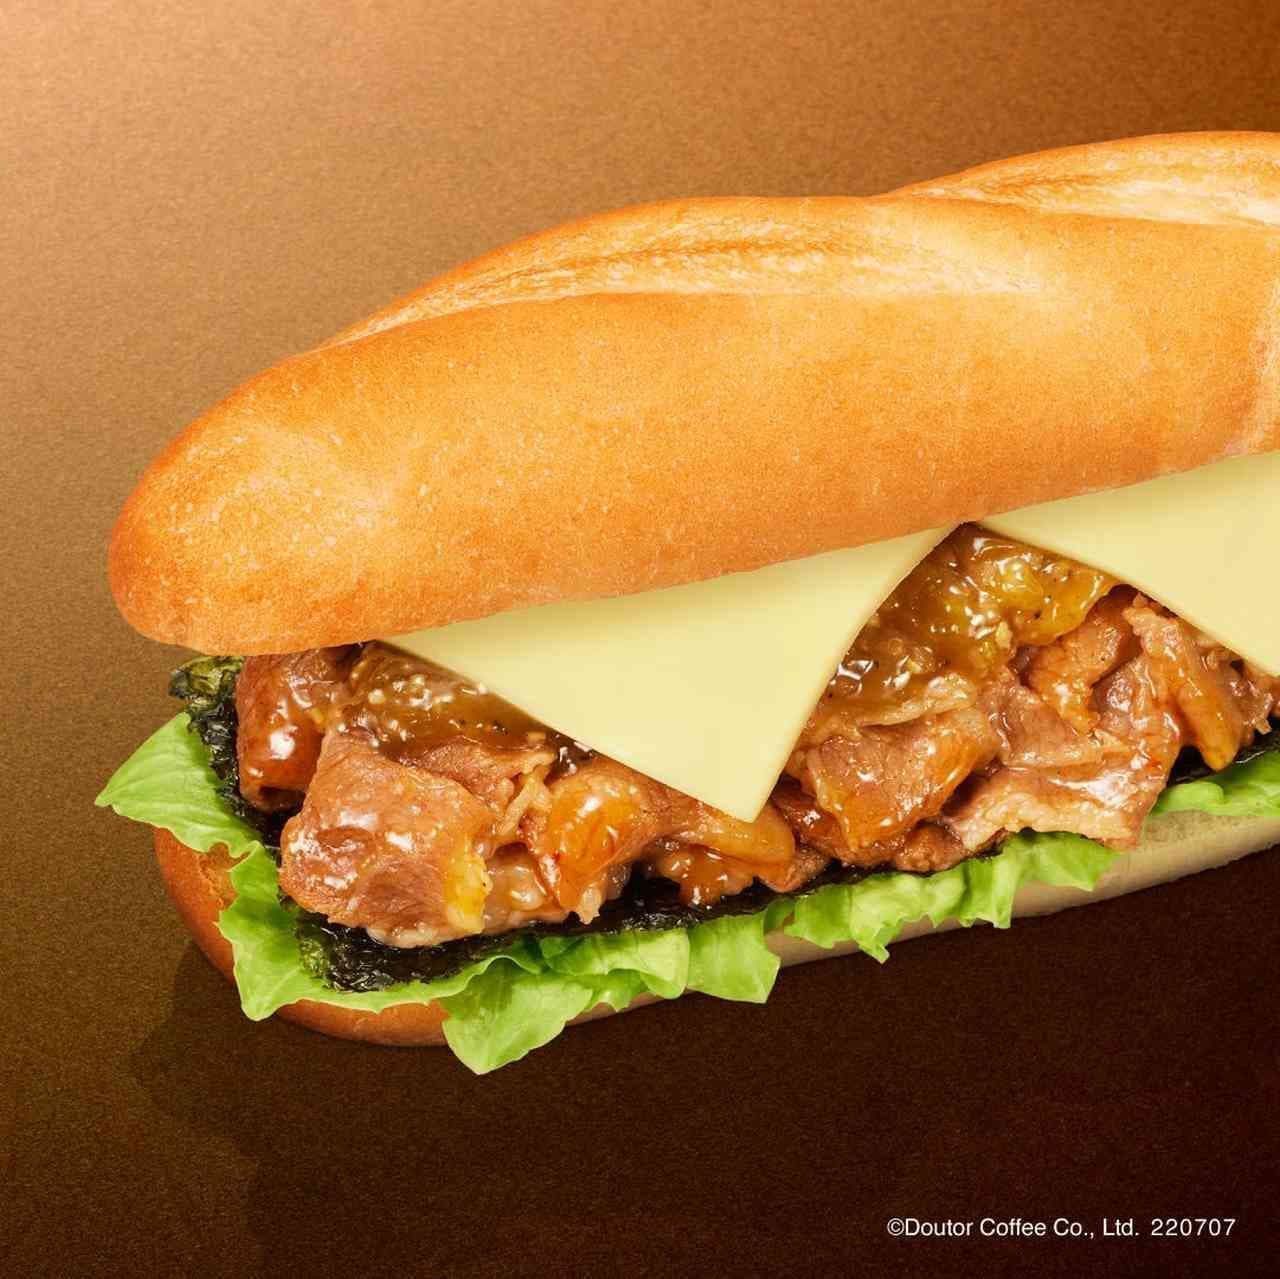 Doutor "Limited Time Milano Sandwich - Beef Kalbi Jalapeno Sauce & Cheese".